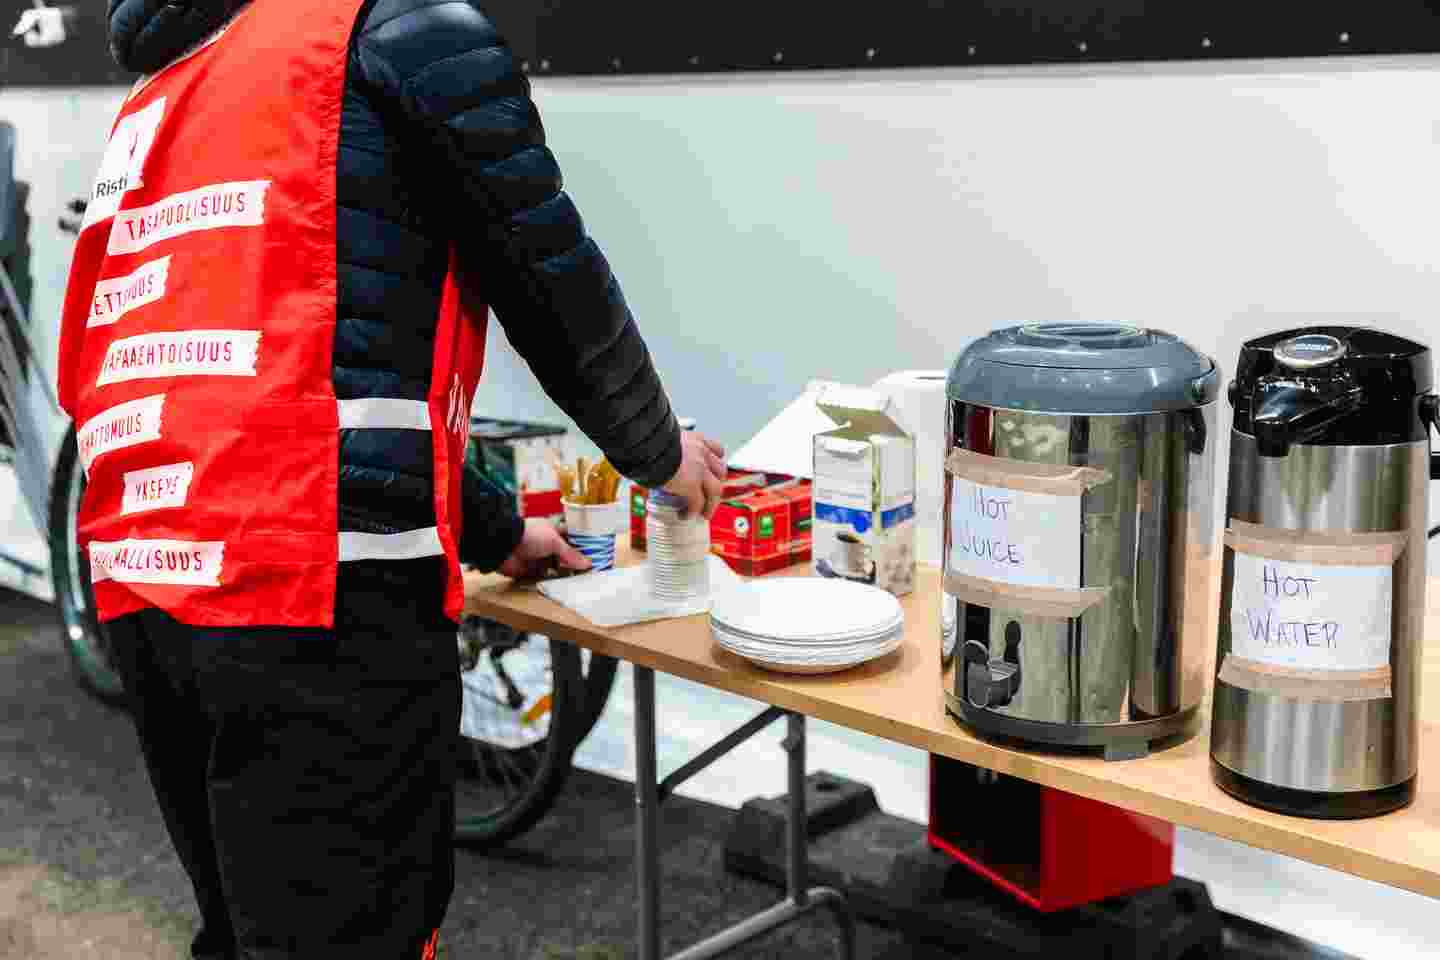 A Red Cross volunteer is organising a table with thermoses filled with hot beverages.